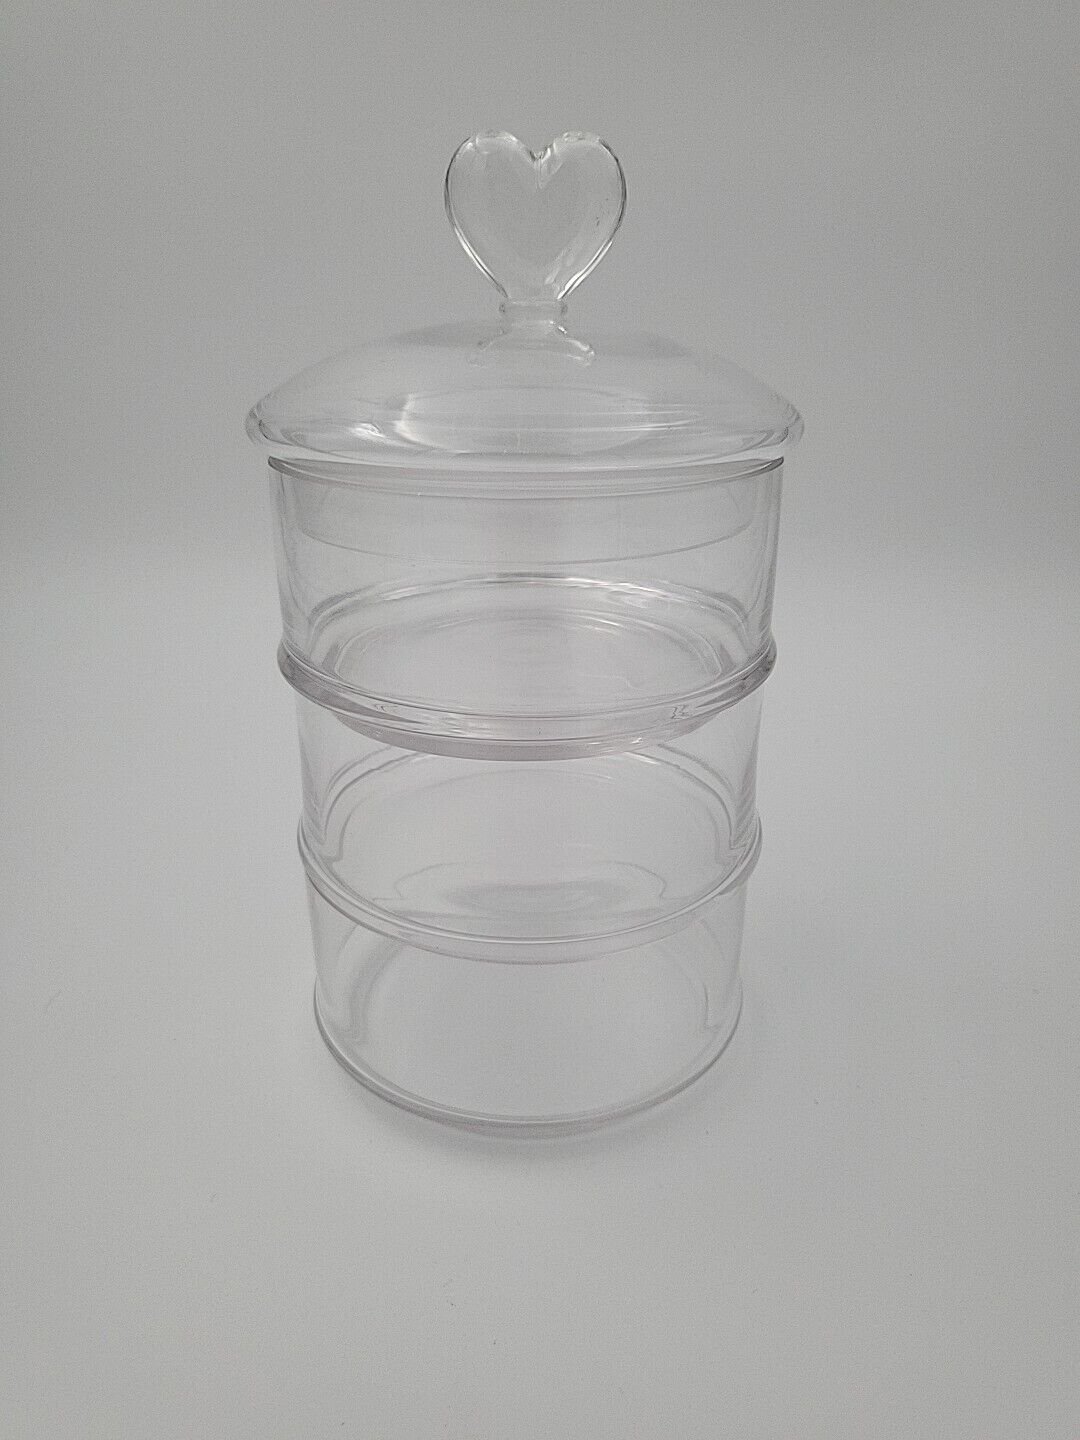 3 Compartment Glass Jar With Heart On Lid